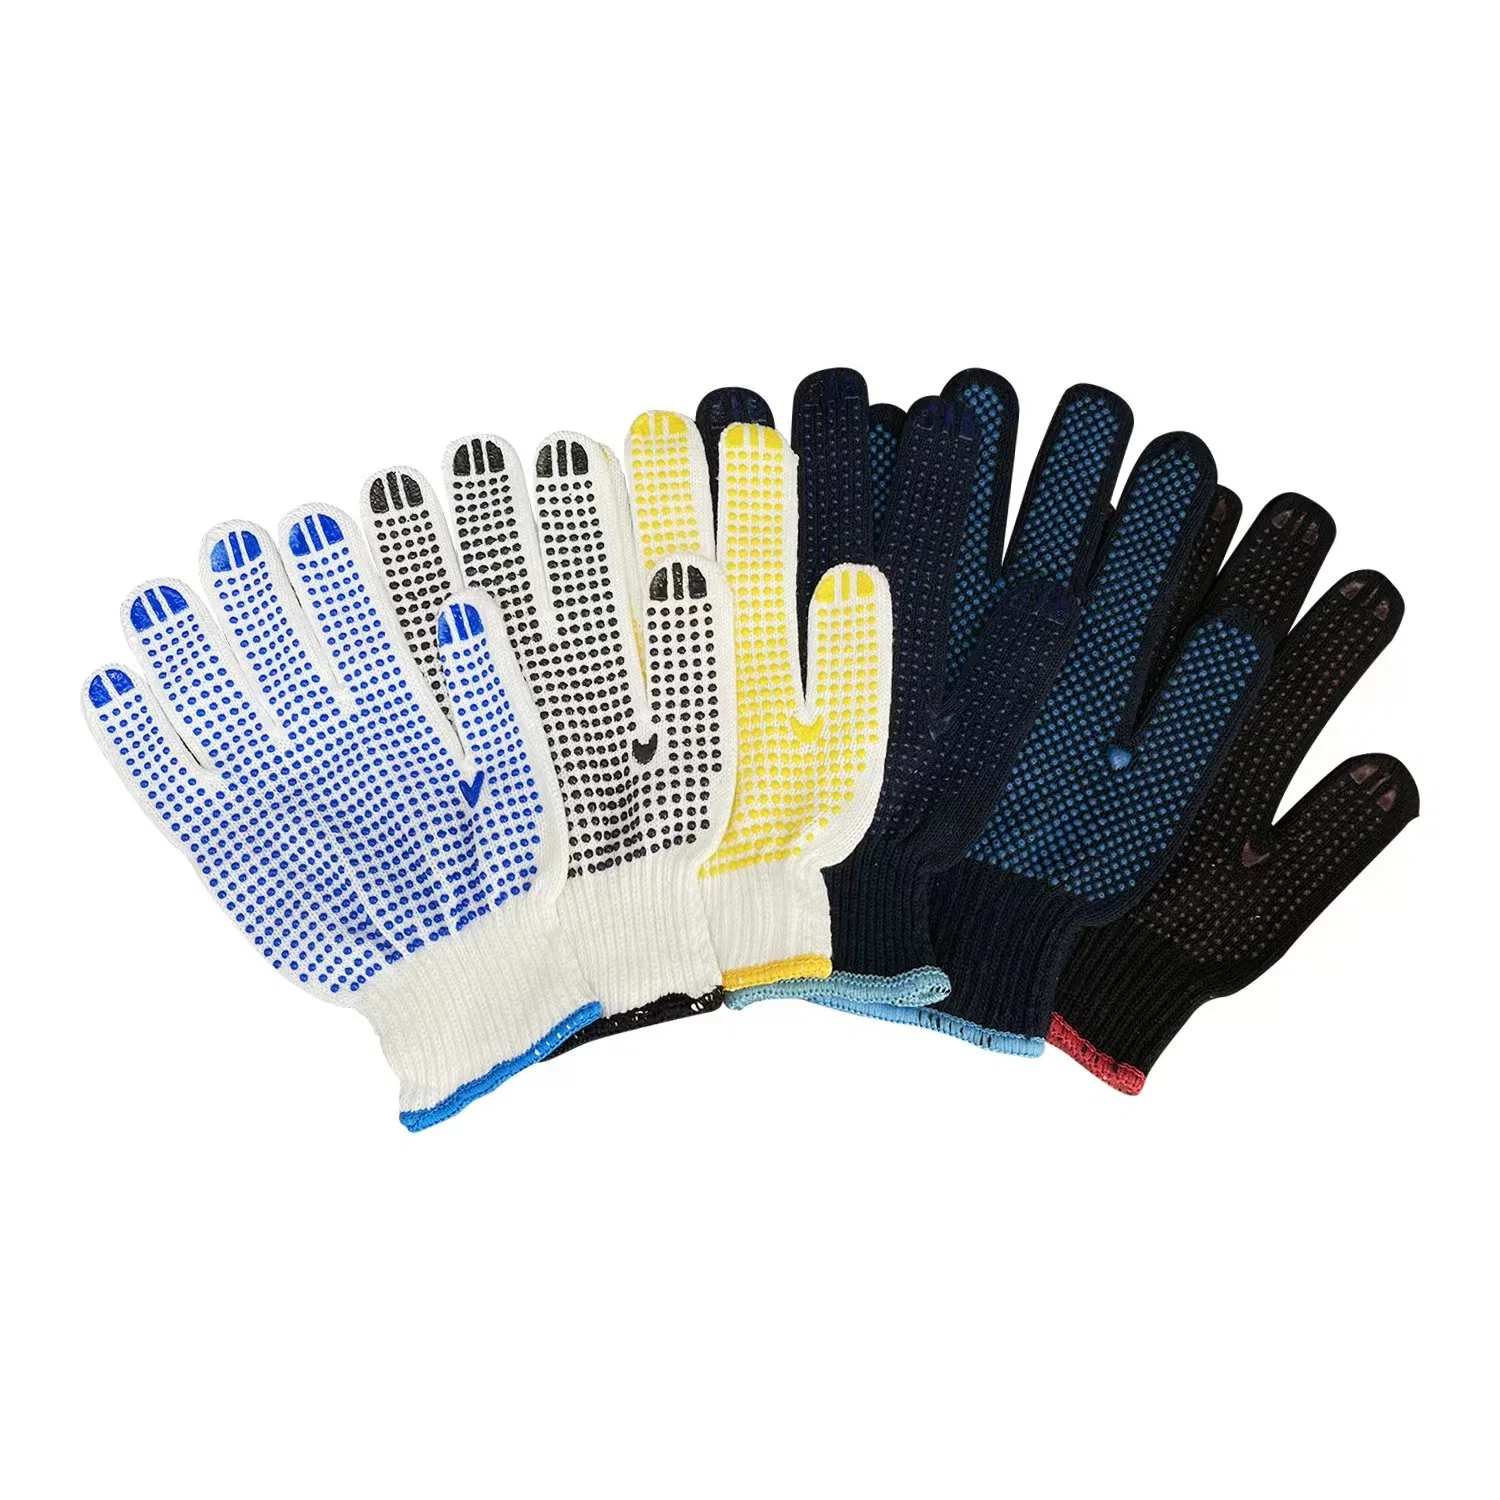 China Wholesale 30-80g/Pair PVC Dotted/Dots Price Cotton Knitted Safety/Industrial/Construction/Garden Gloves for Protective Work/Working